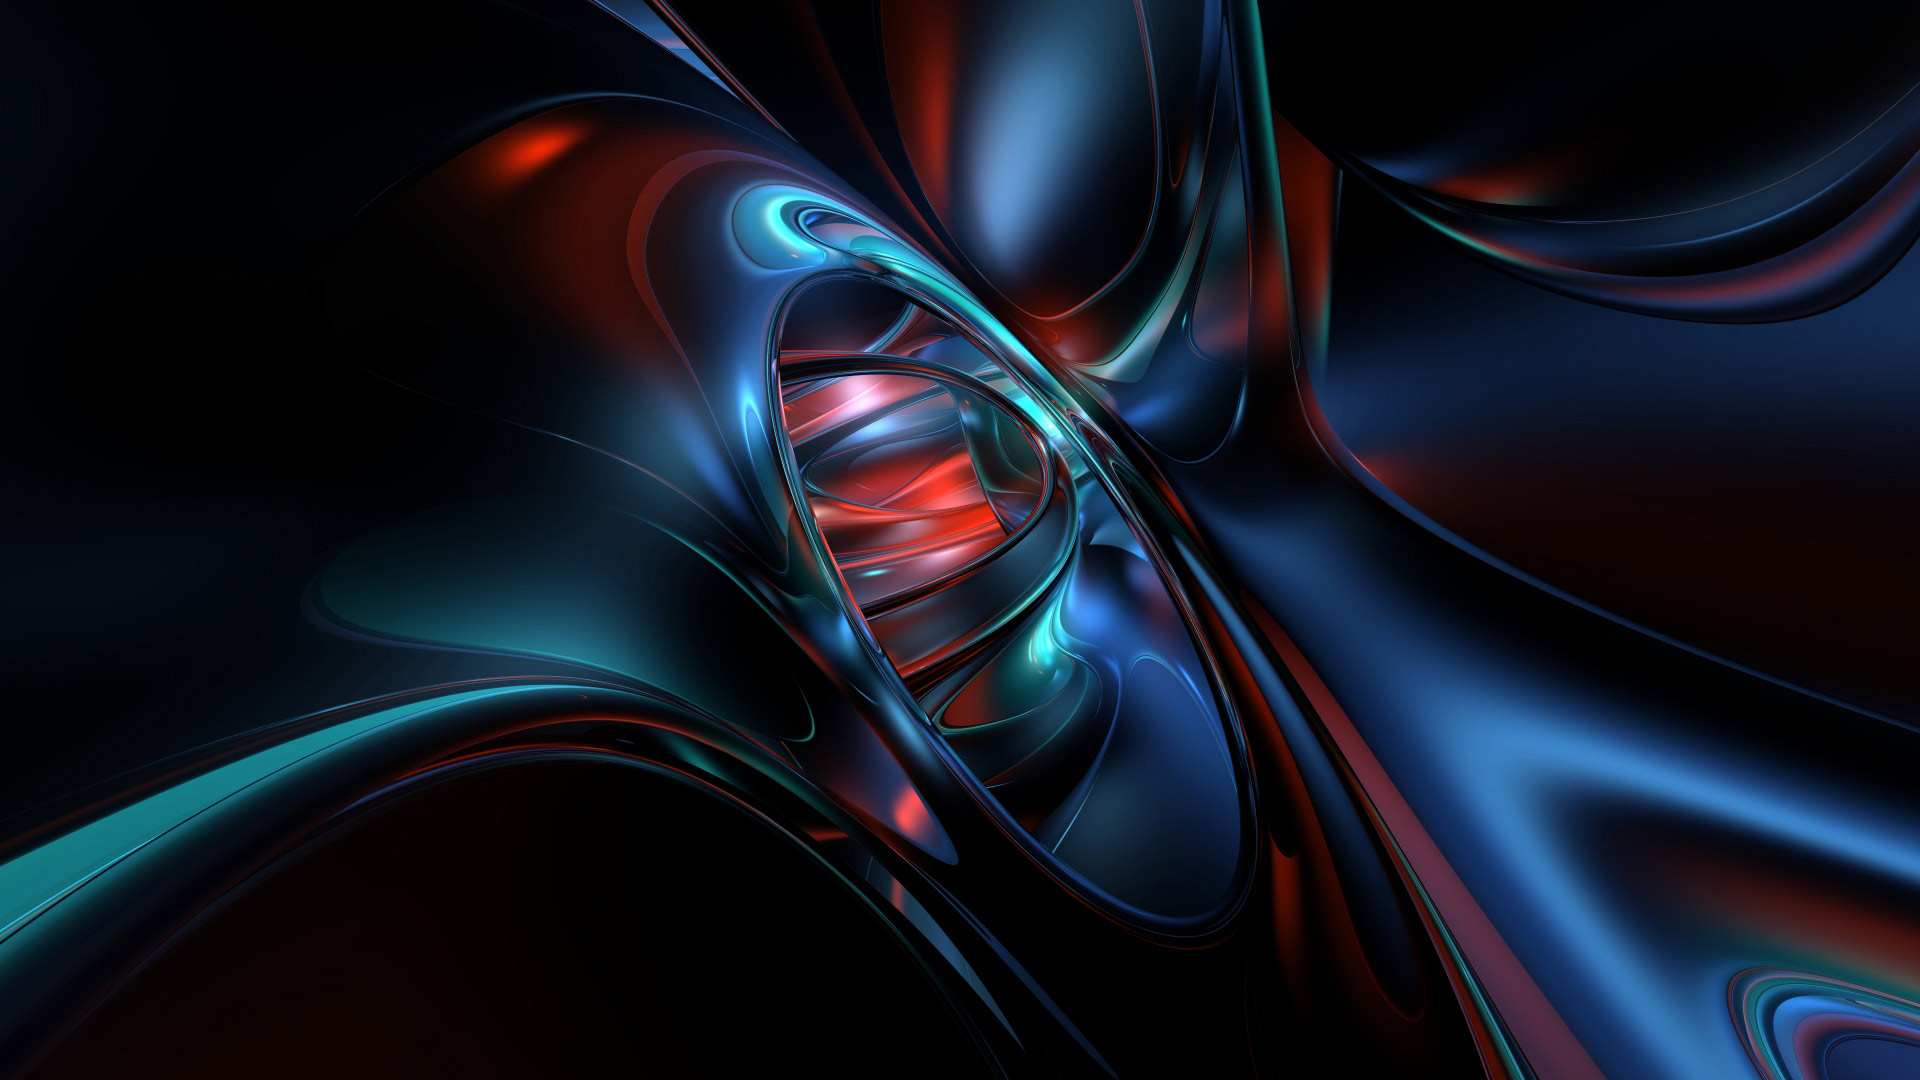 Blue Red Teal And Black Abstract Wallpaper